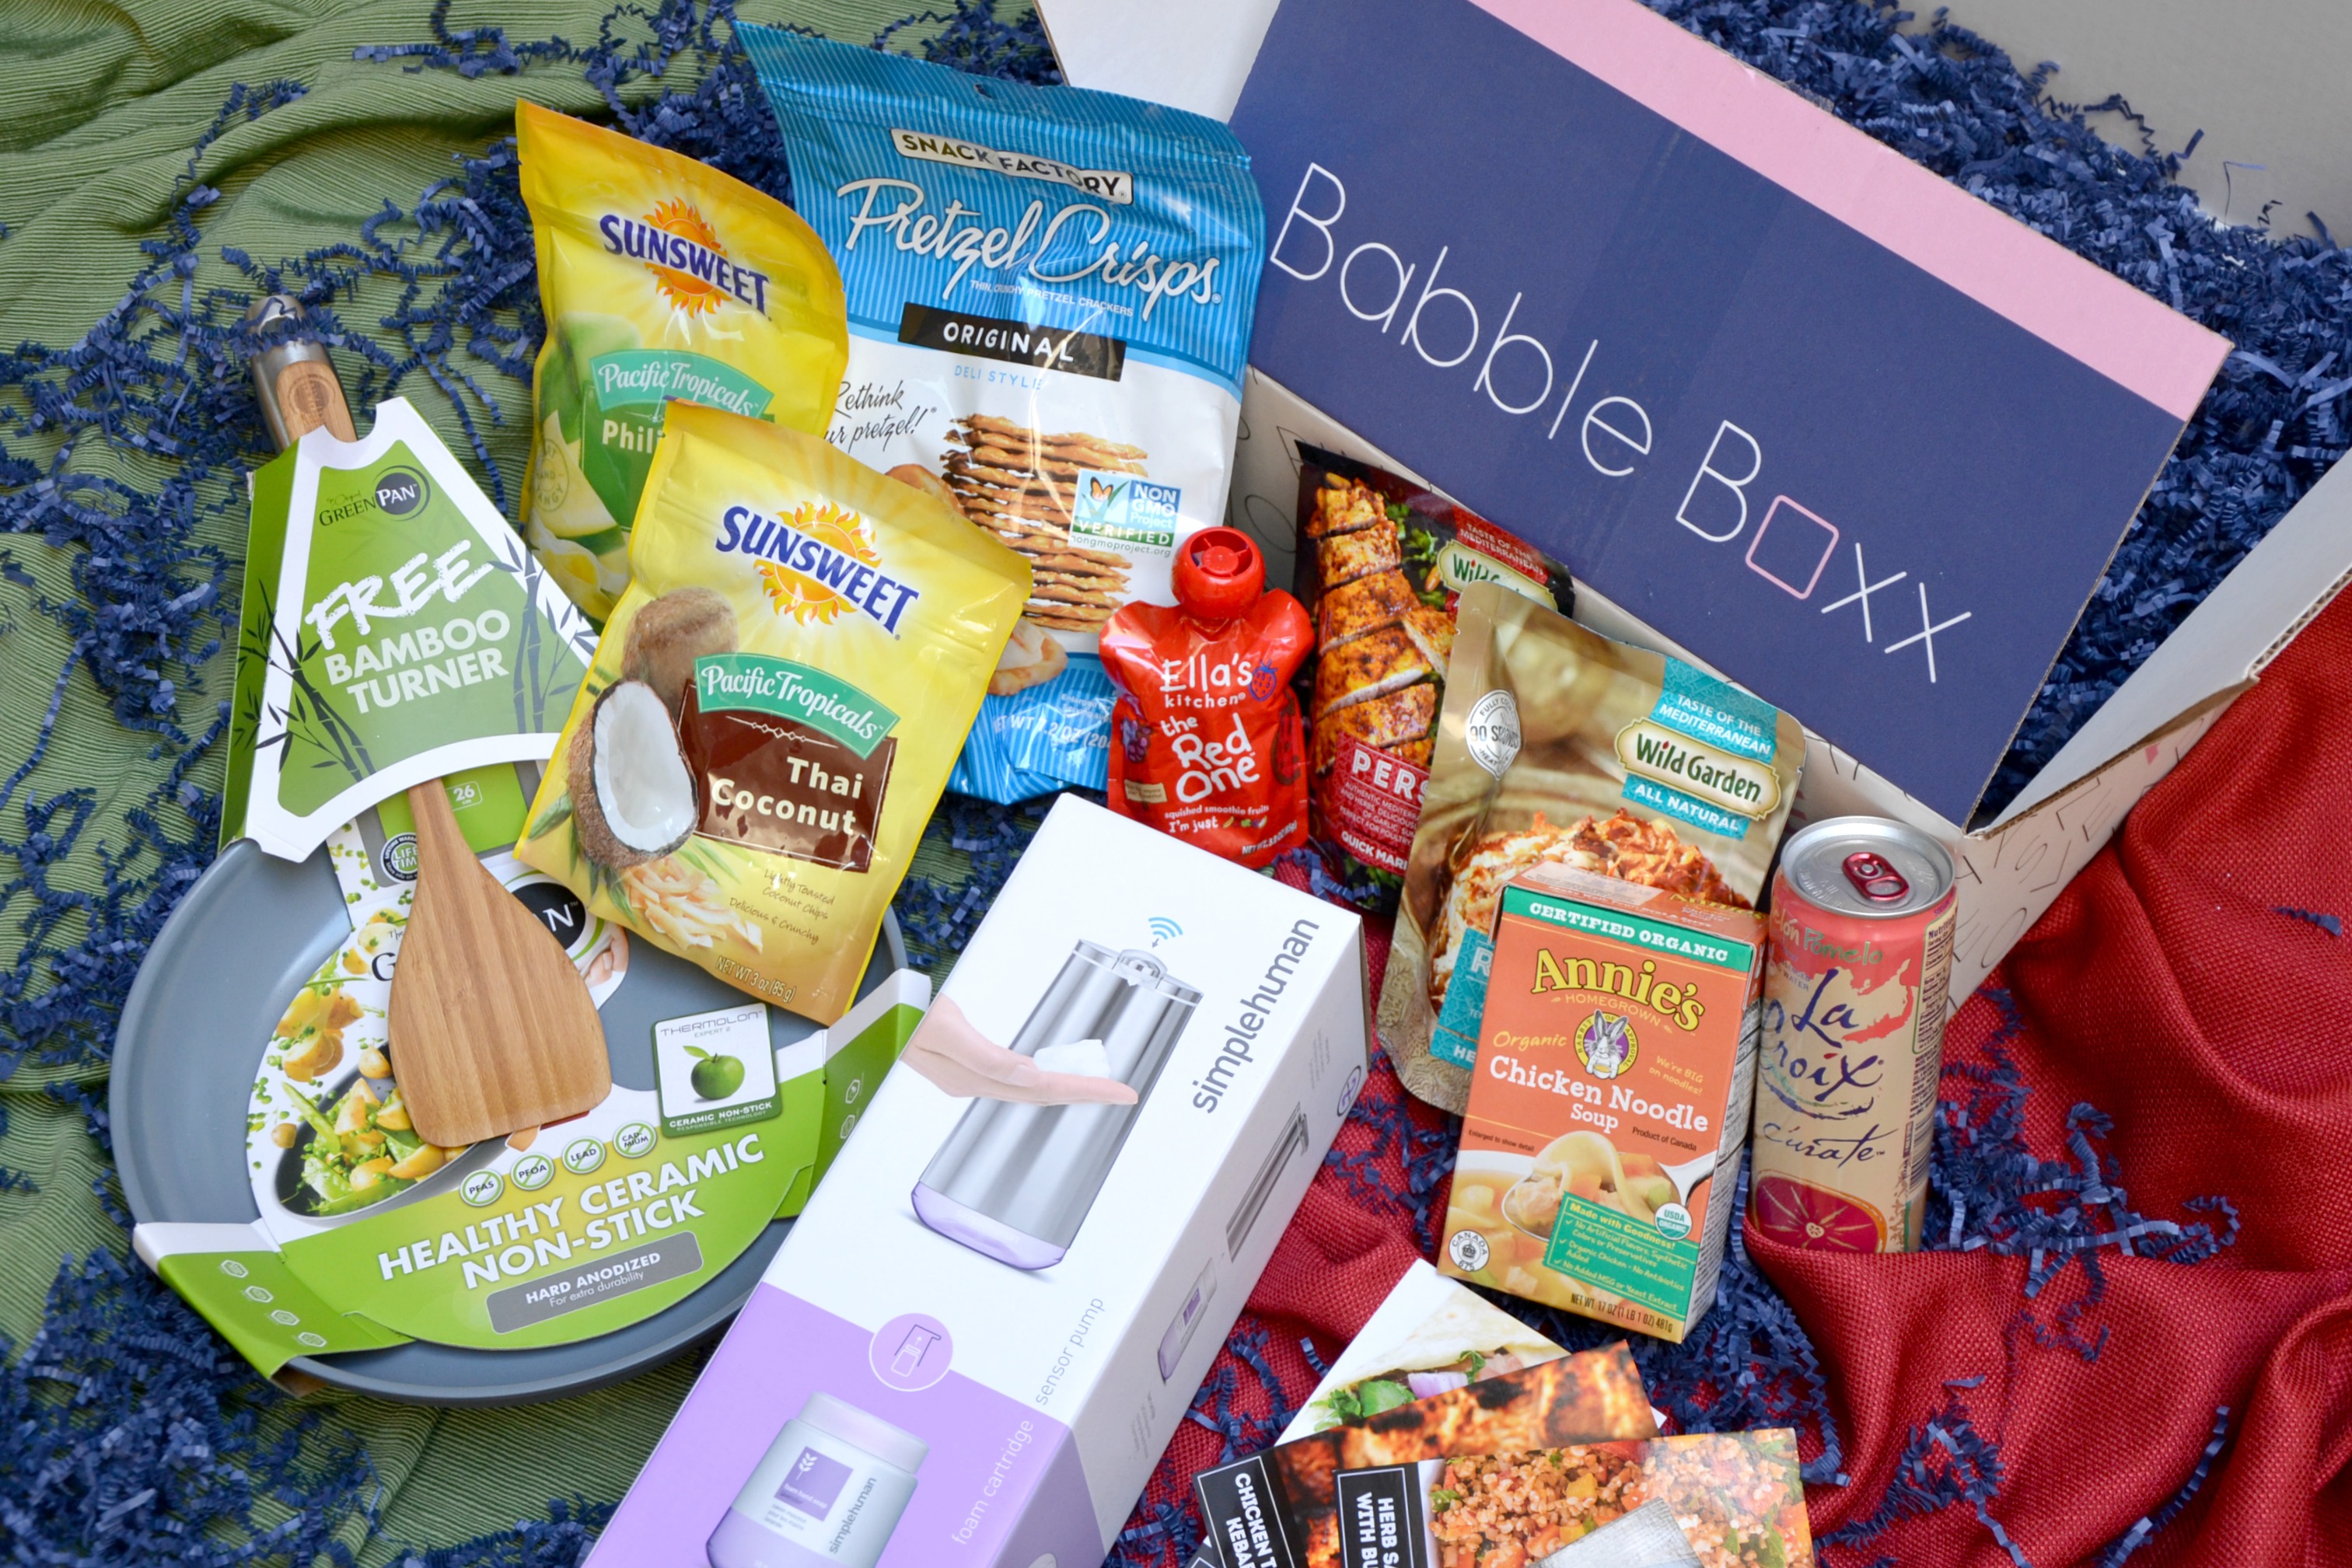 BabbleBoxx Hosting and Toasting box